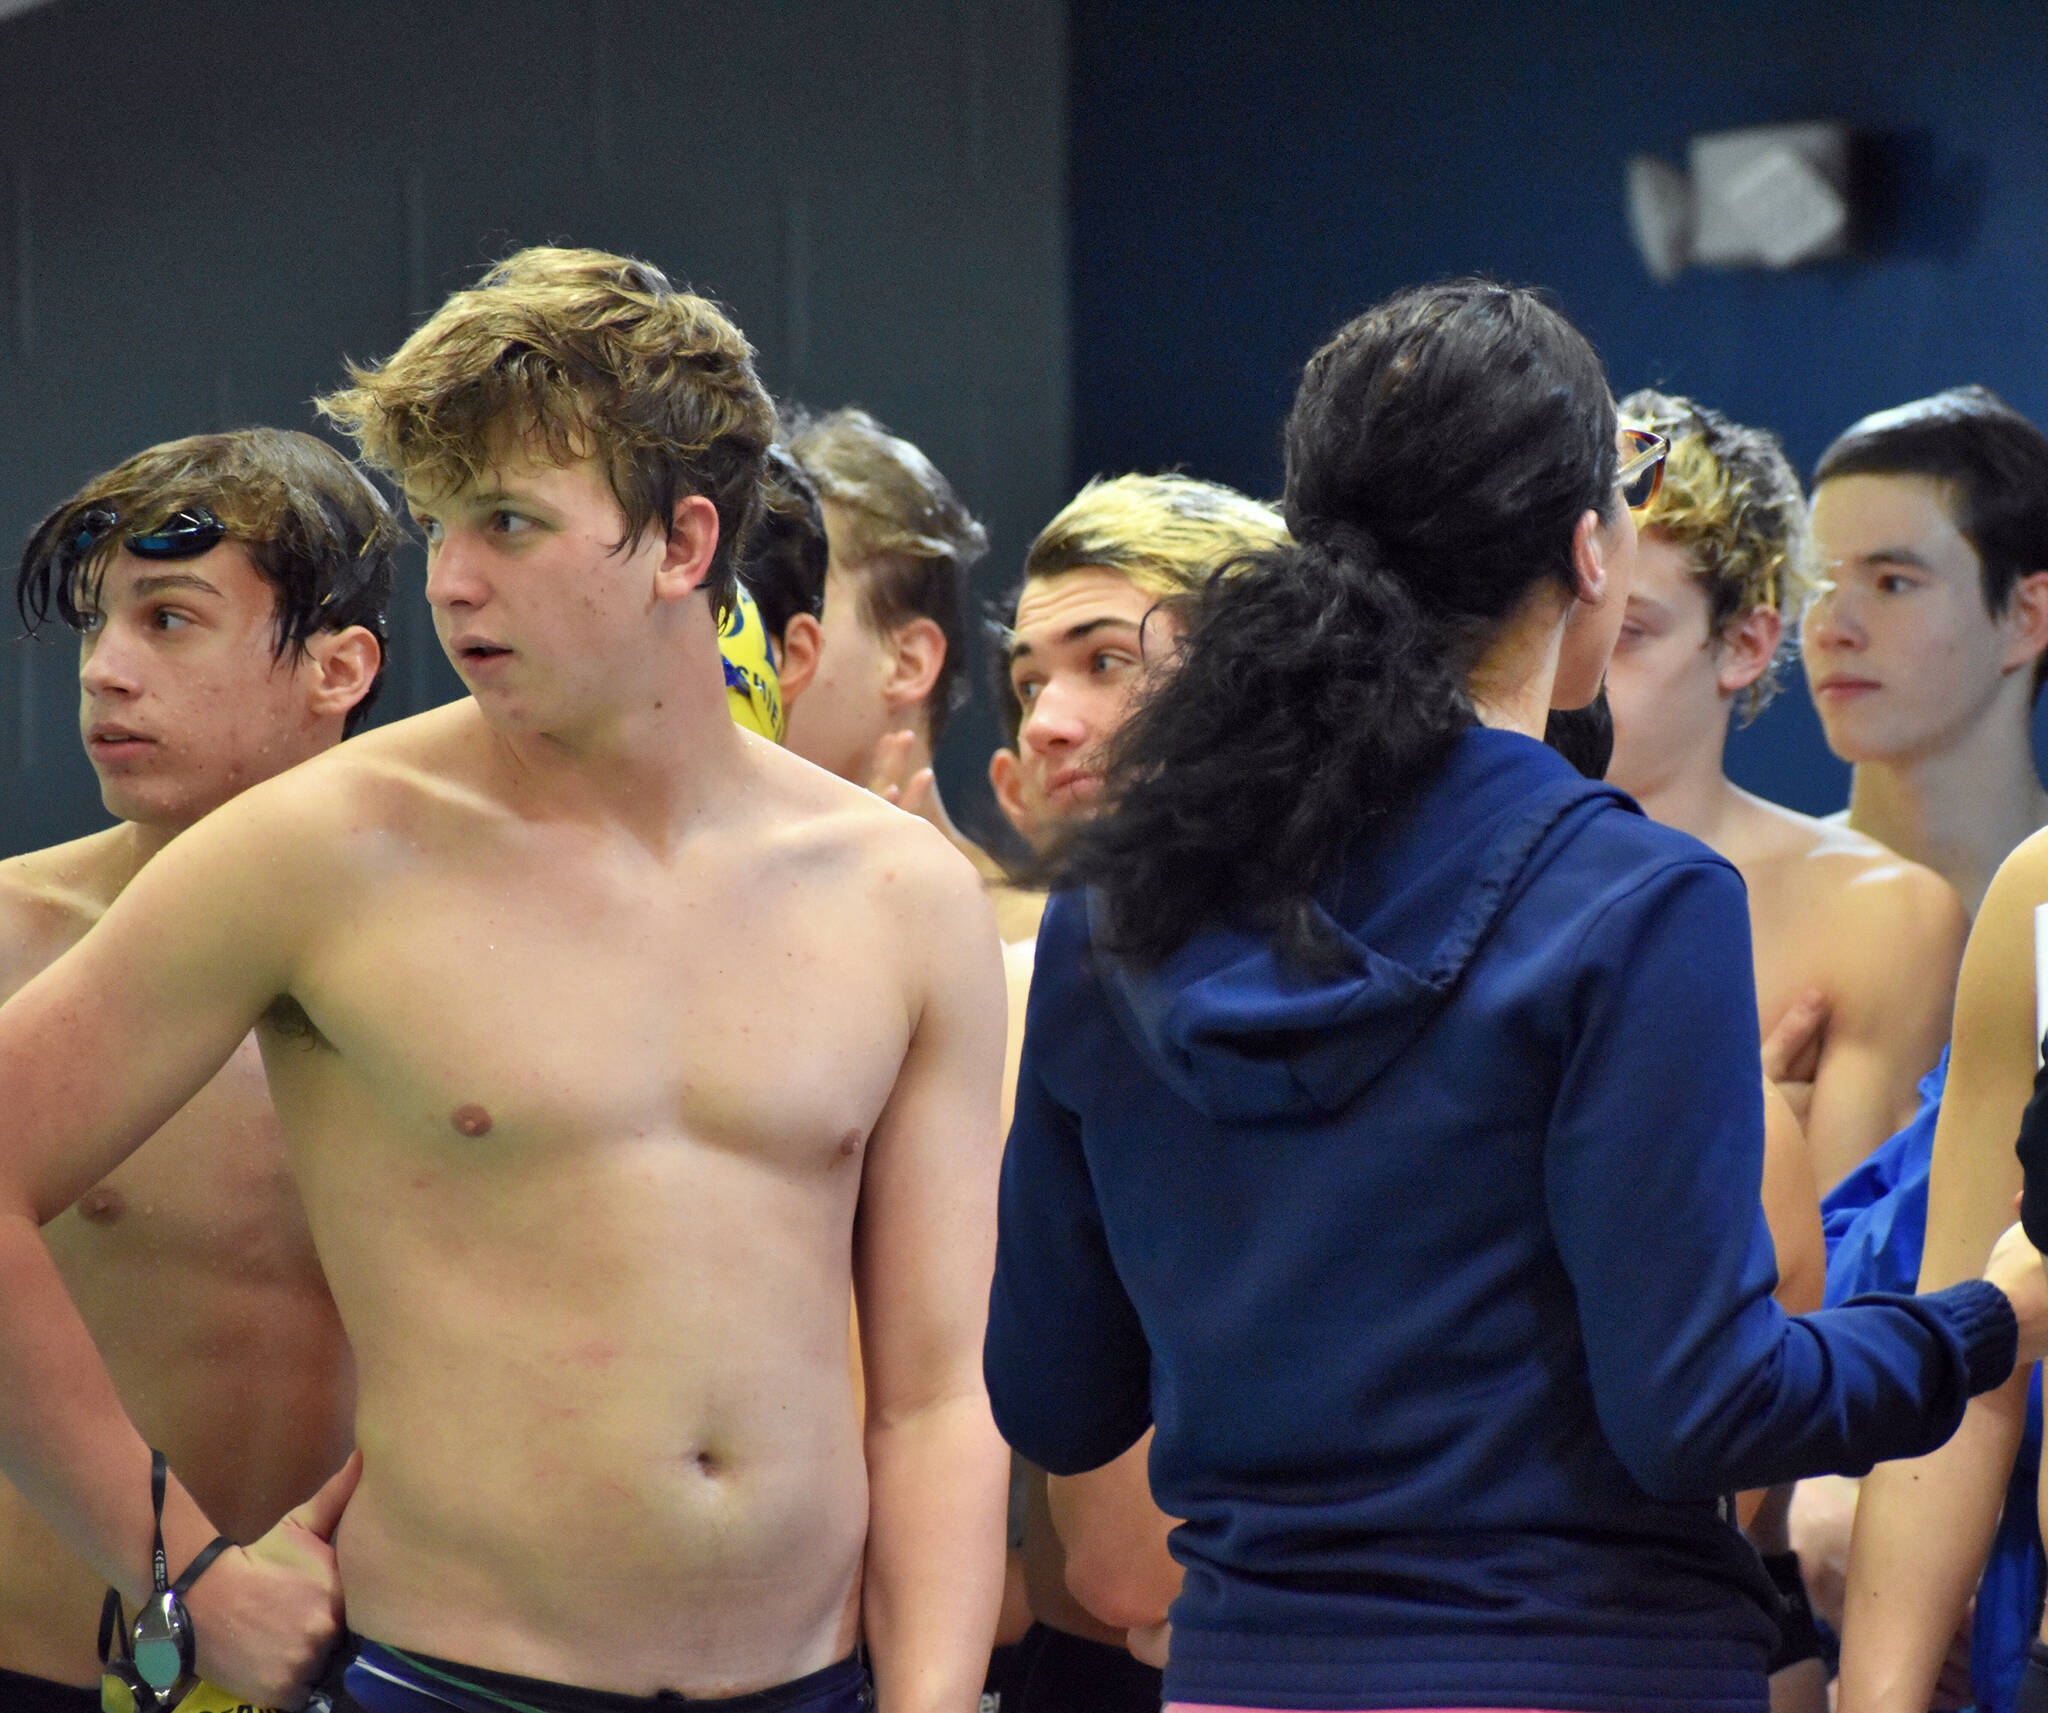 The Bainbridge Spartans look across the pool to scout their rivals before the swim meet begins.